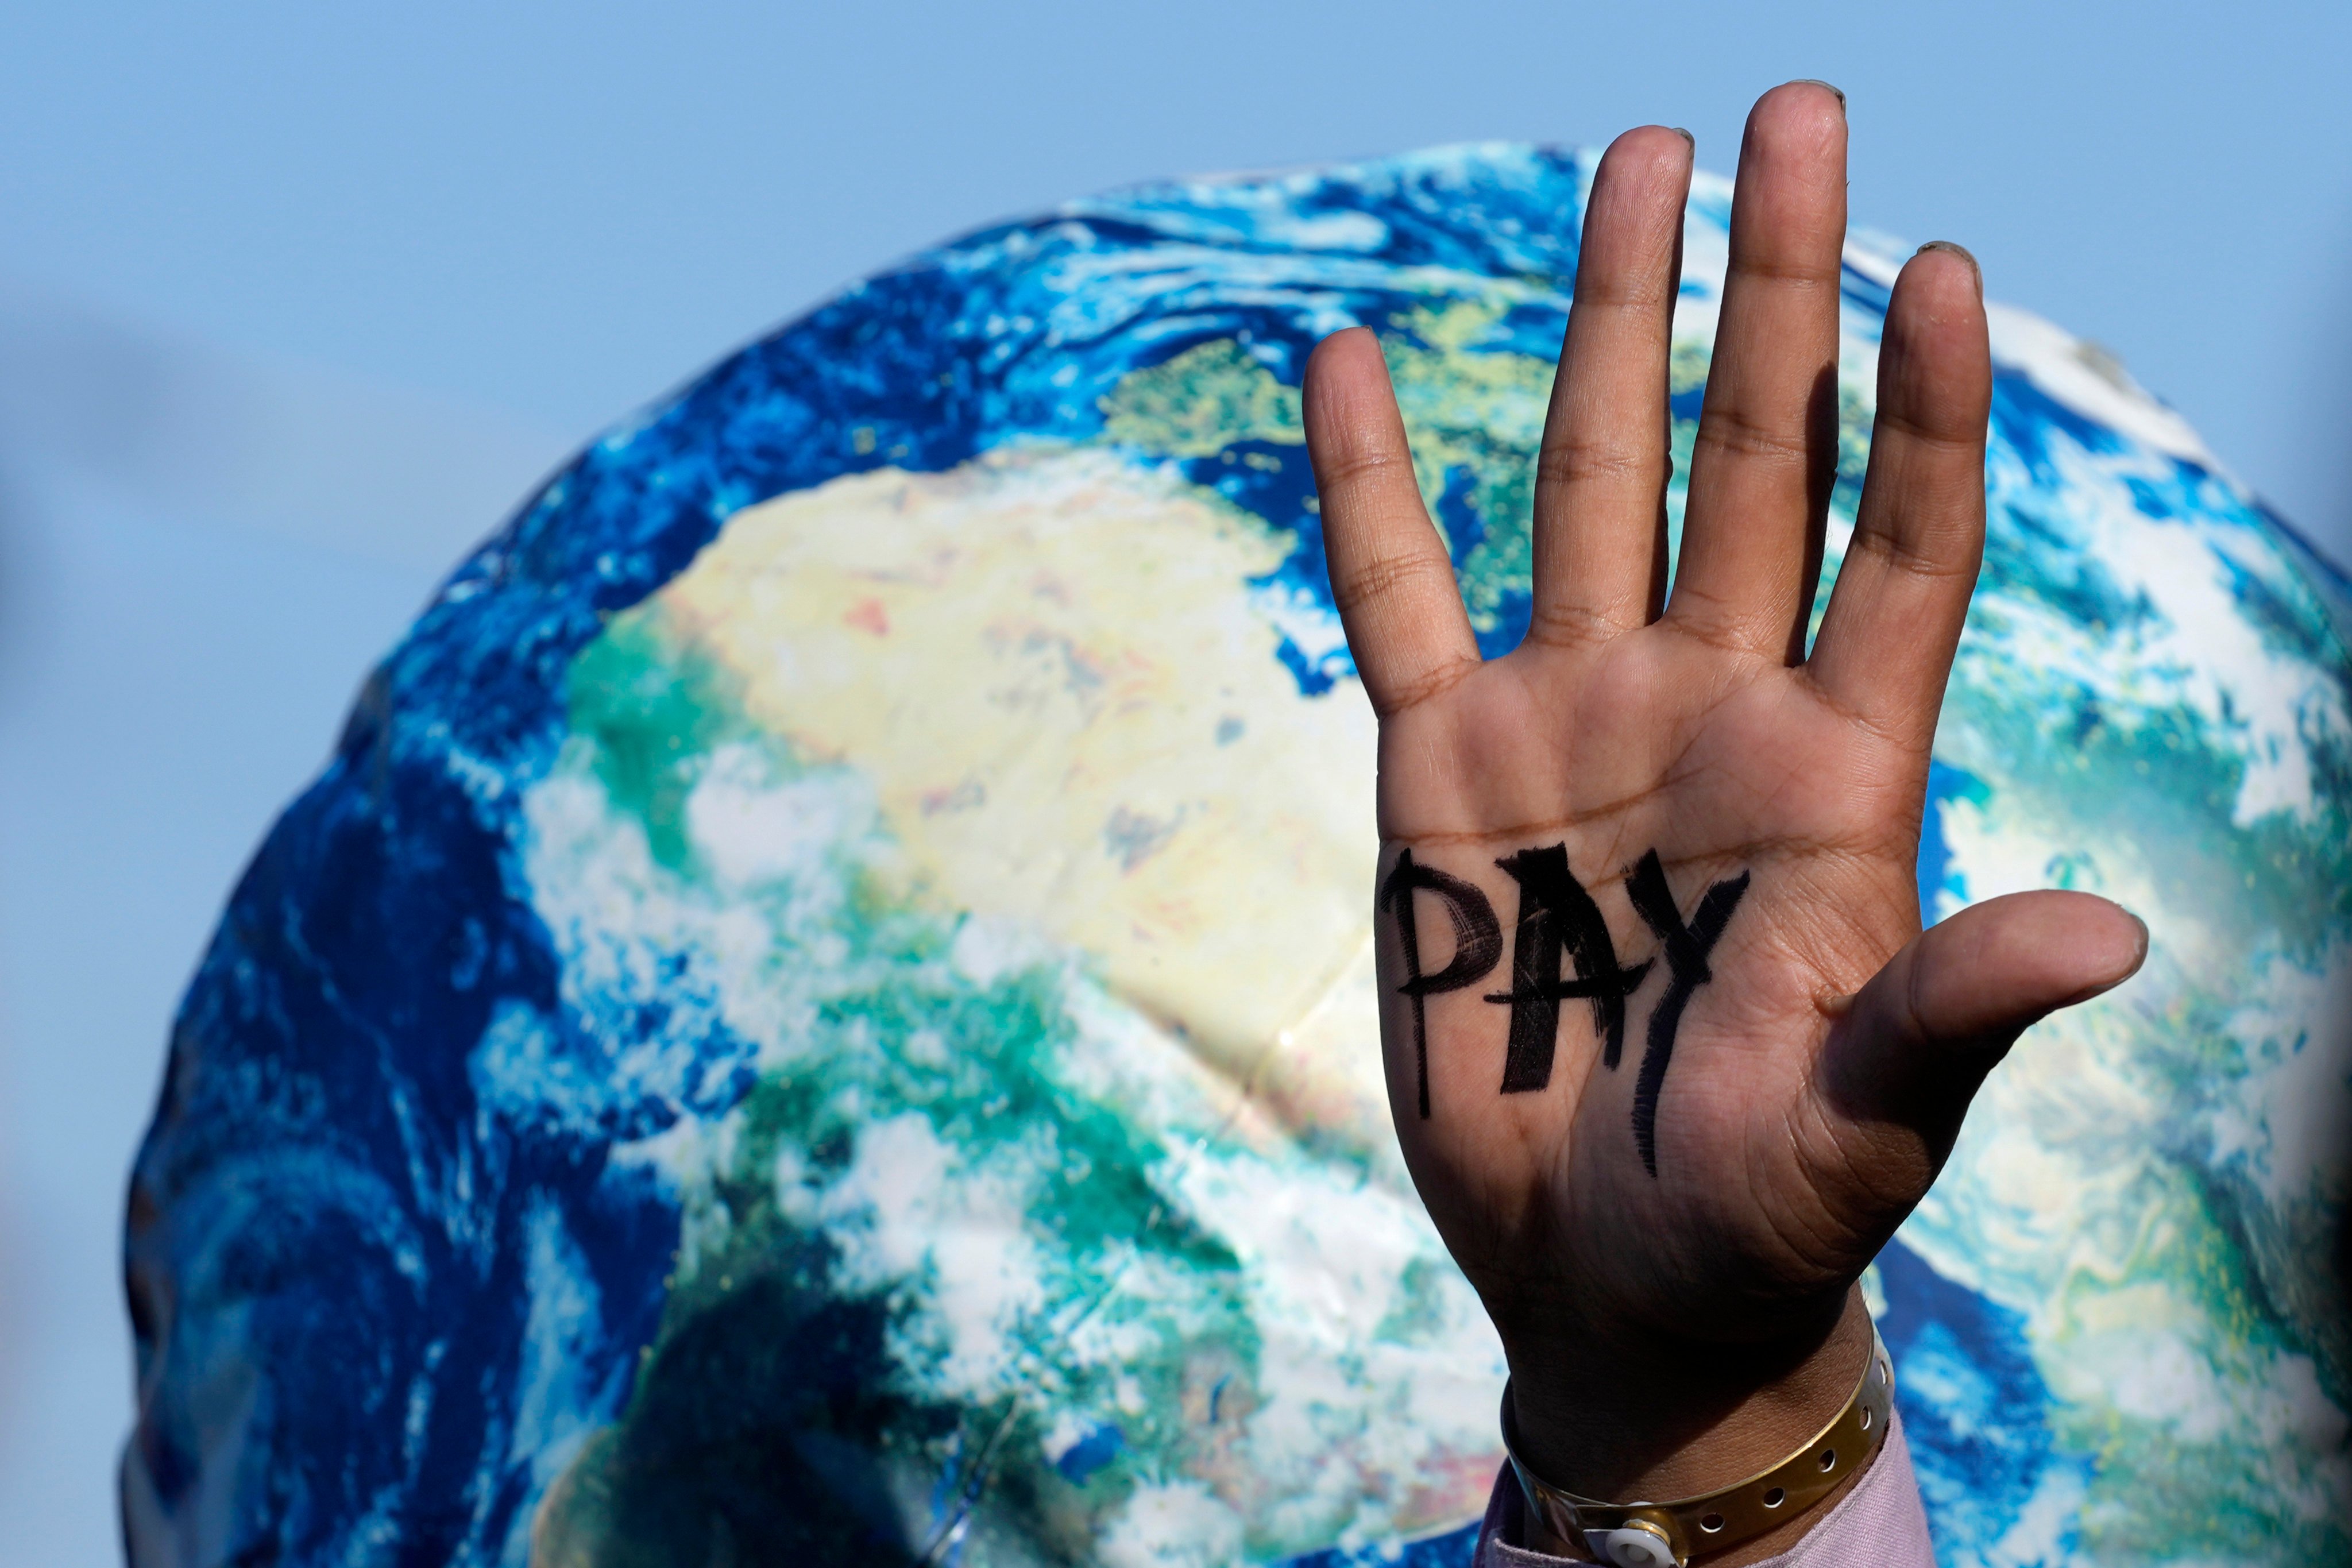 A hand reads ‘pay’ calling for reparations for loss and damage at the COP27 UN Climate Summit, in Sharm el-Sheikh, Egypt, on November 8, 2022. Photo: AP Photo